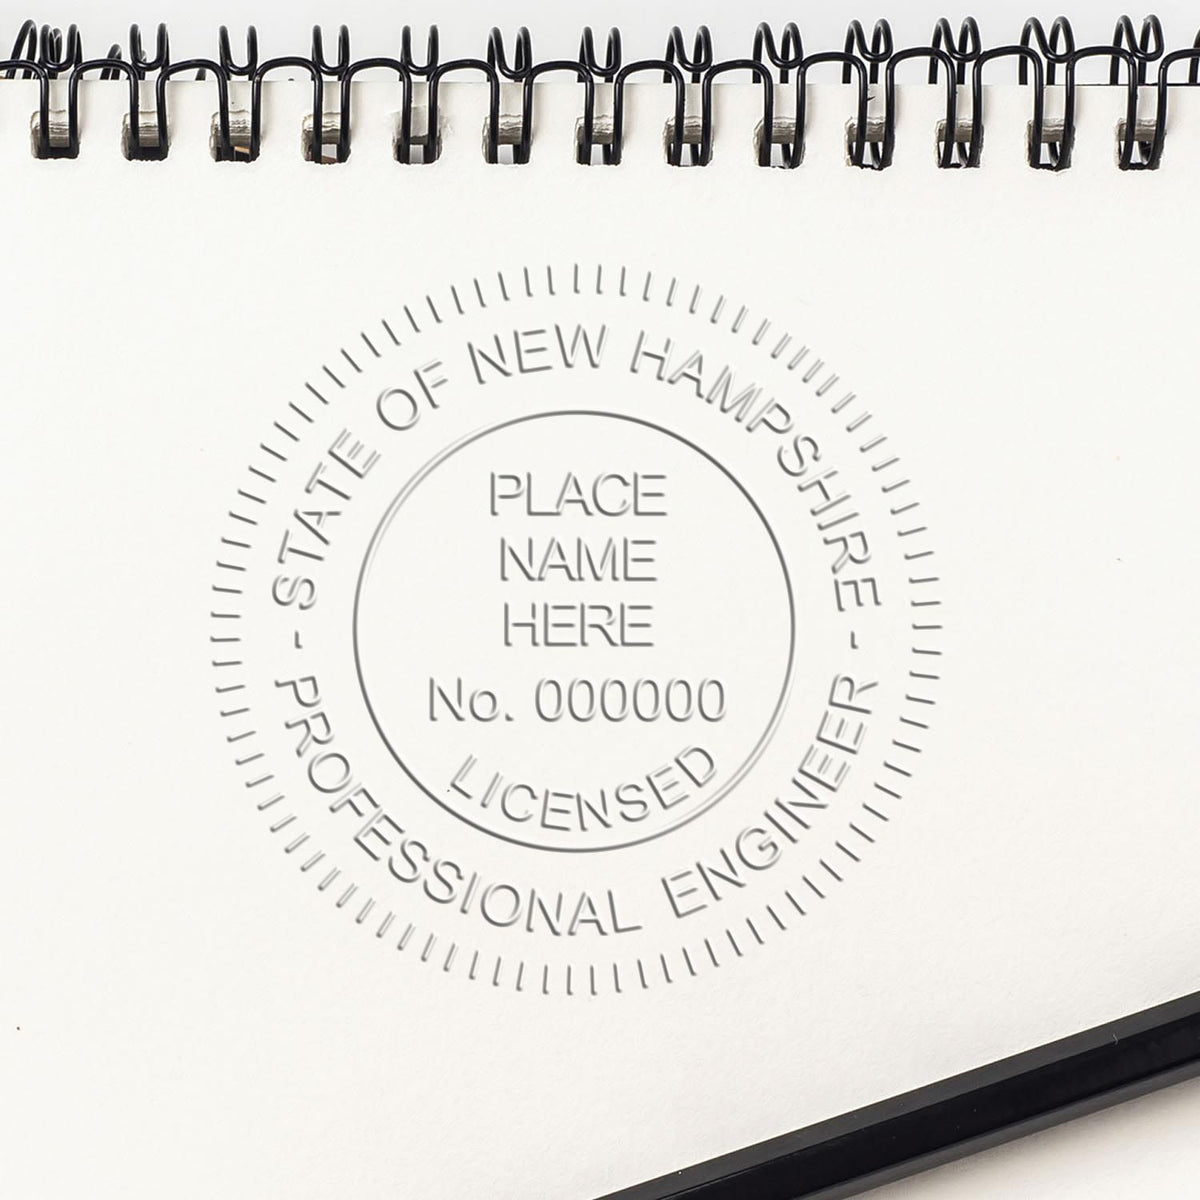 A photograph of the New Hampshire Engineer Desk Seal stamp impression reveals a vivid, professional image of the on paper.